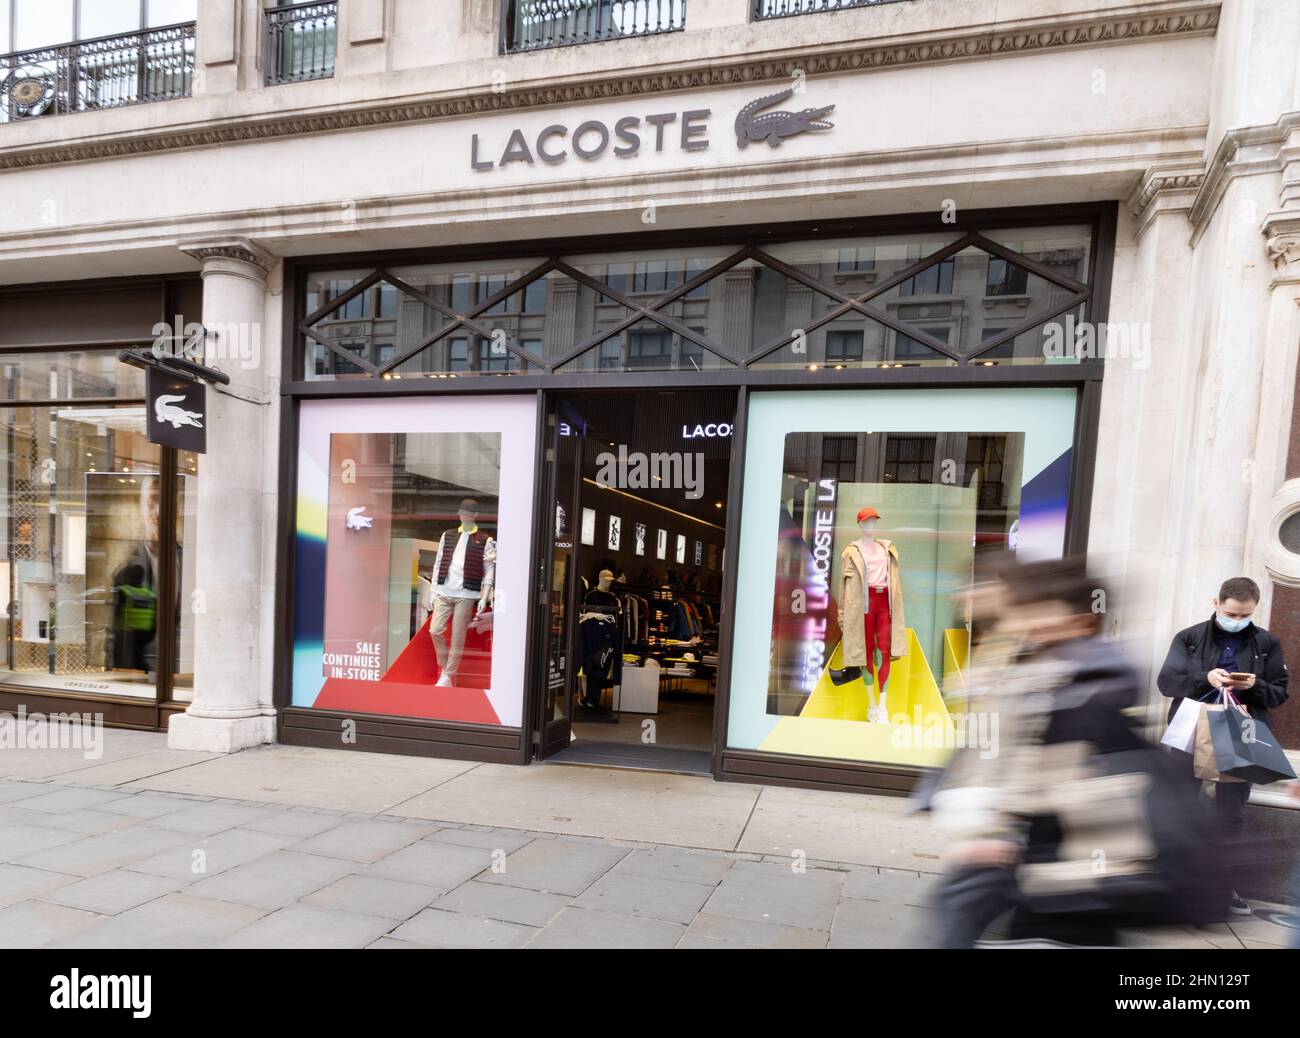 Lacoste store The of the Lacoste shop on Regent Street, Central London UK. Retail outlet for Lacoste S.A. clothing and fashion Stock Photo - Alamy